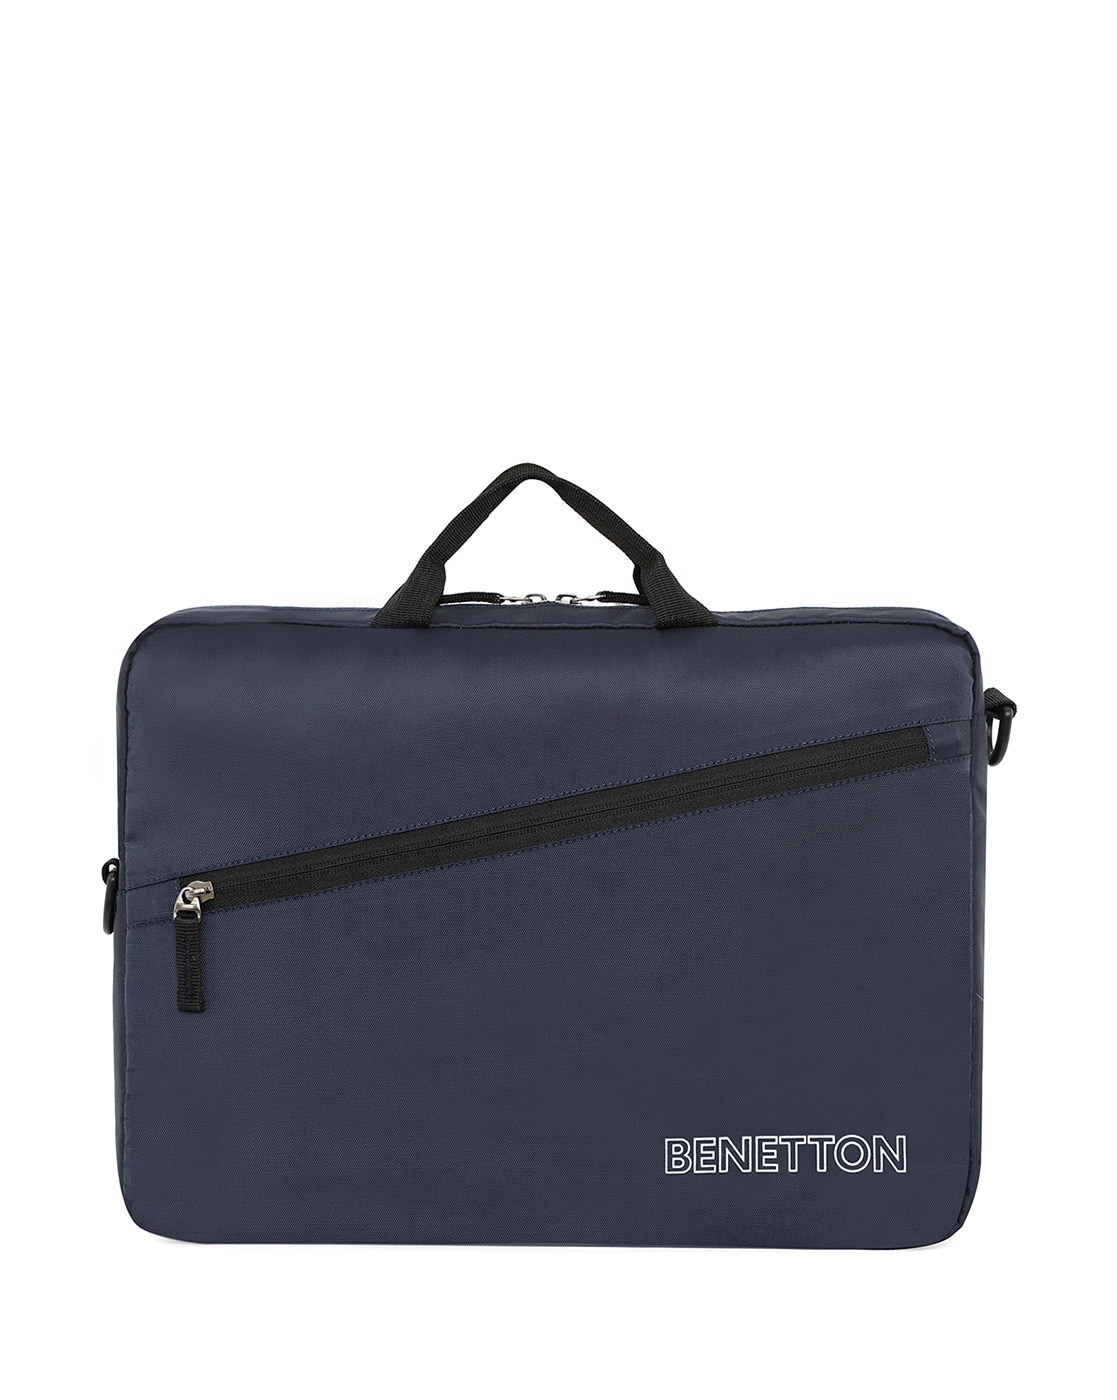 Buy United Colors of Benetton Brown Laptop Bag (18P6BAGS5008I) at Amazon.in